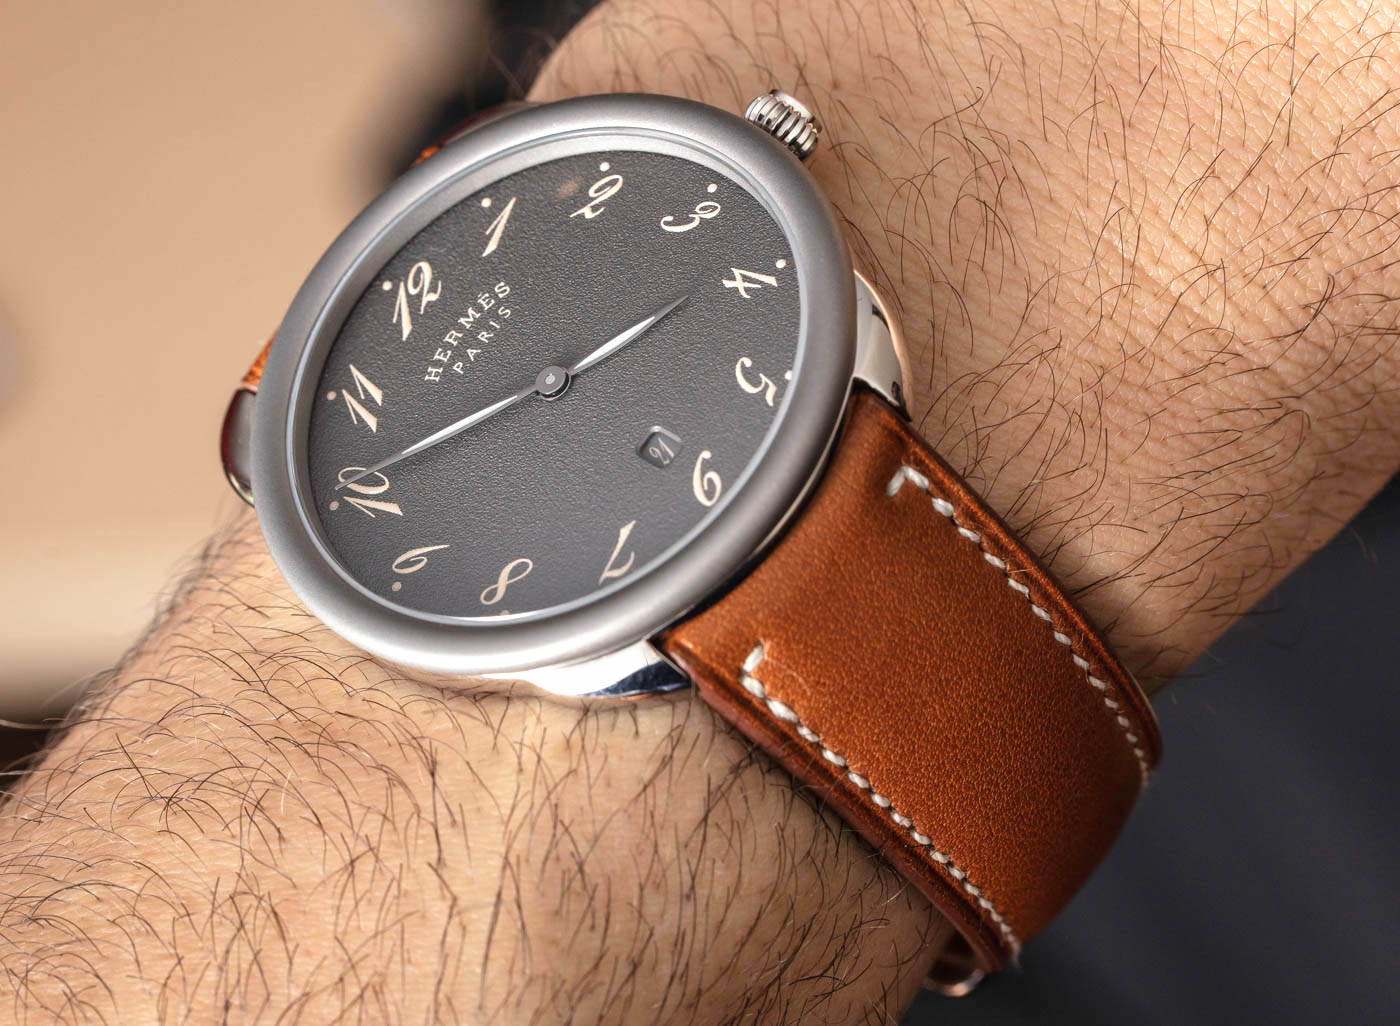 Black Exclusive Panerai style band in Barenia / Luxury Hermes French calf  leather